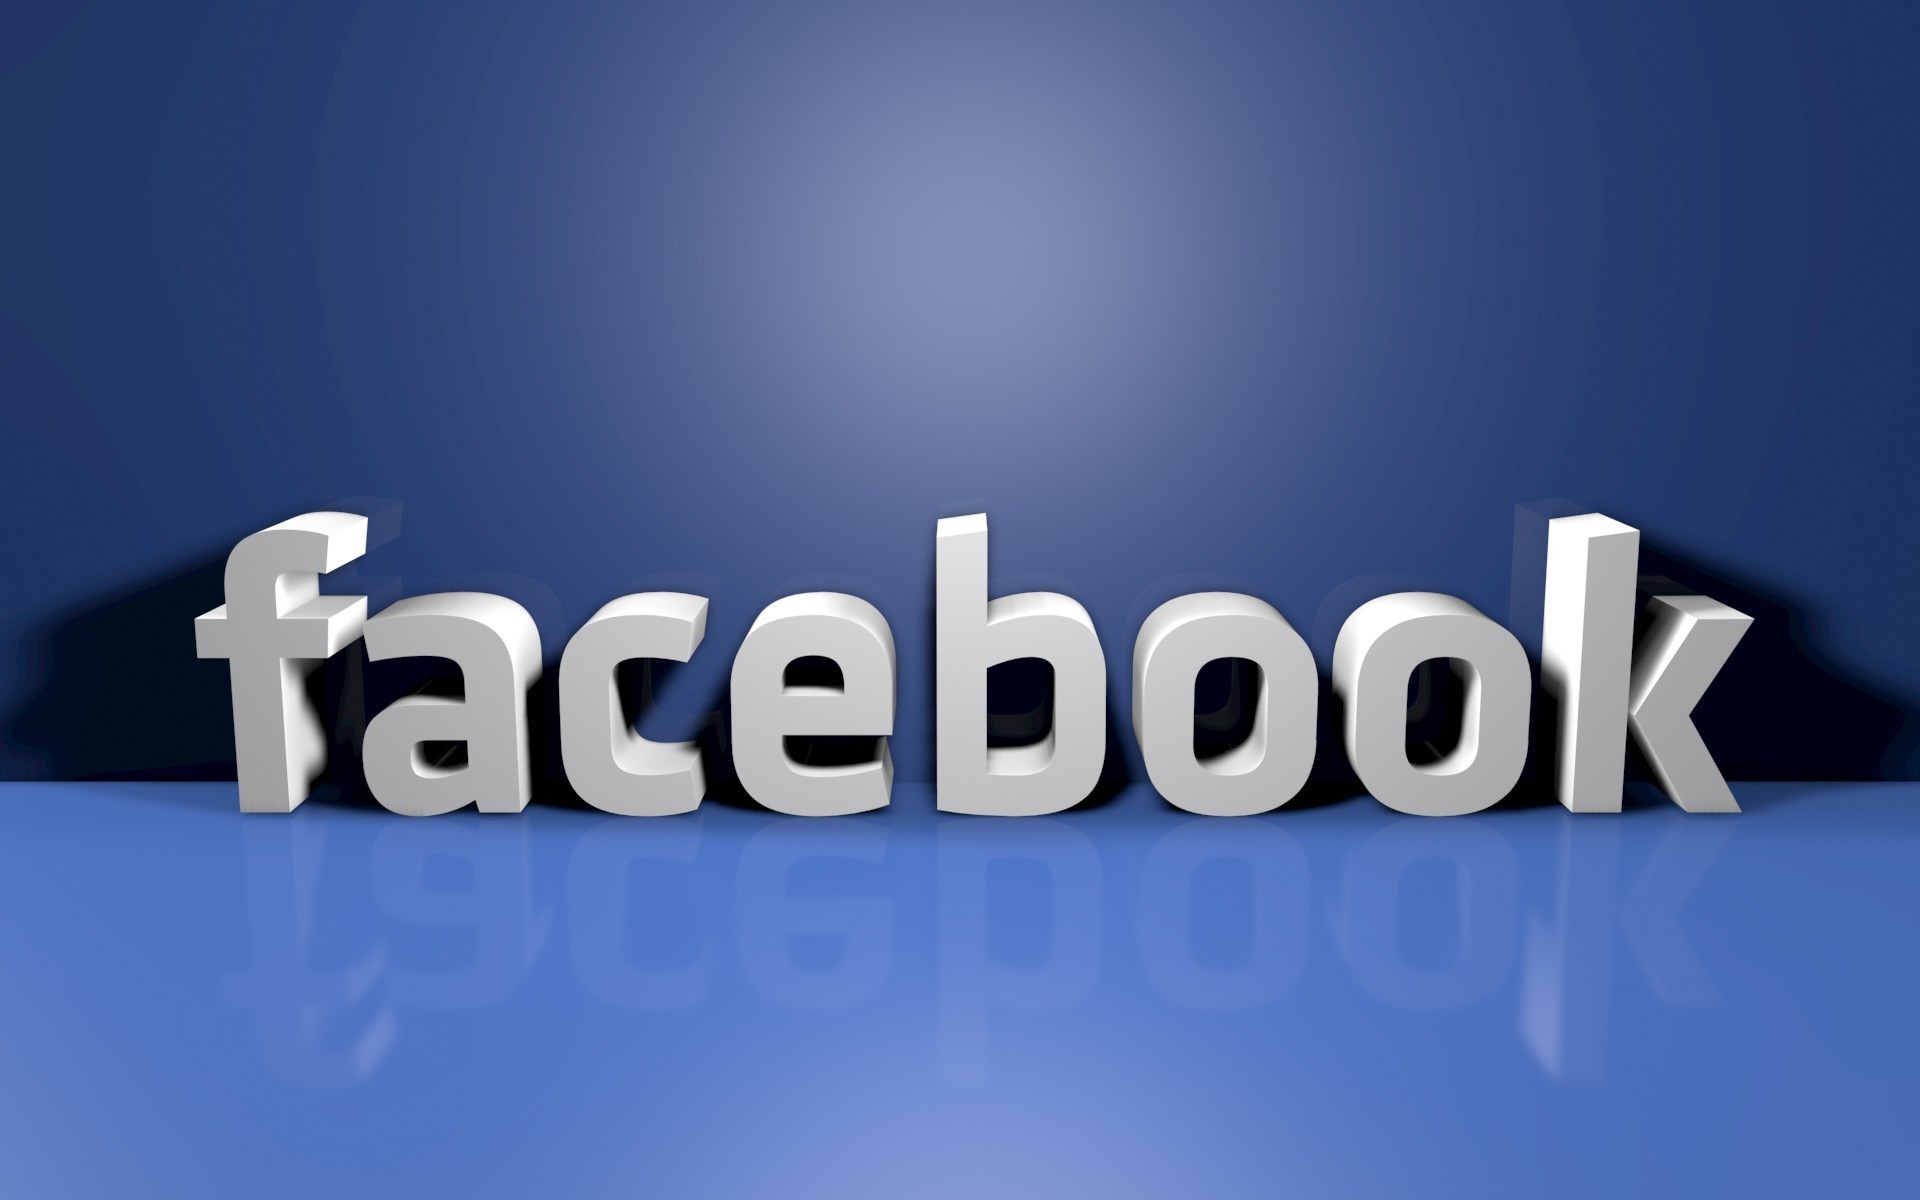 Facebook on a blue background wallpapers and images - wallpapers